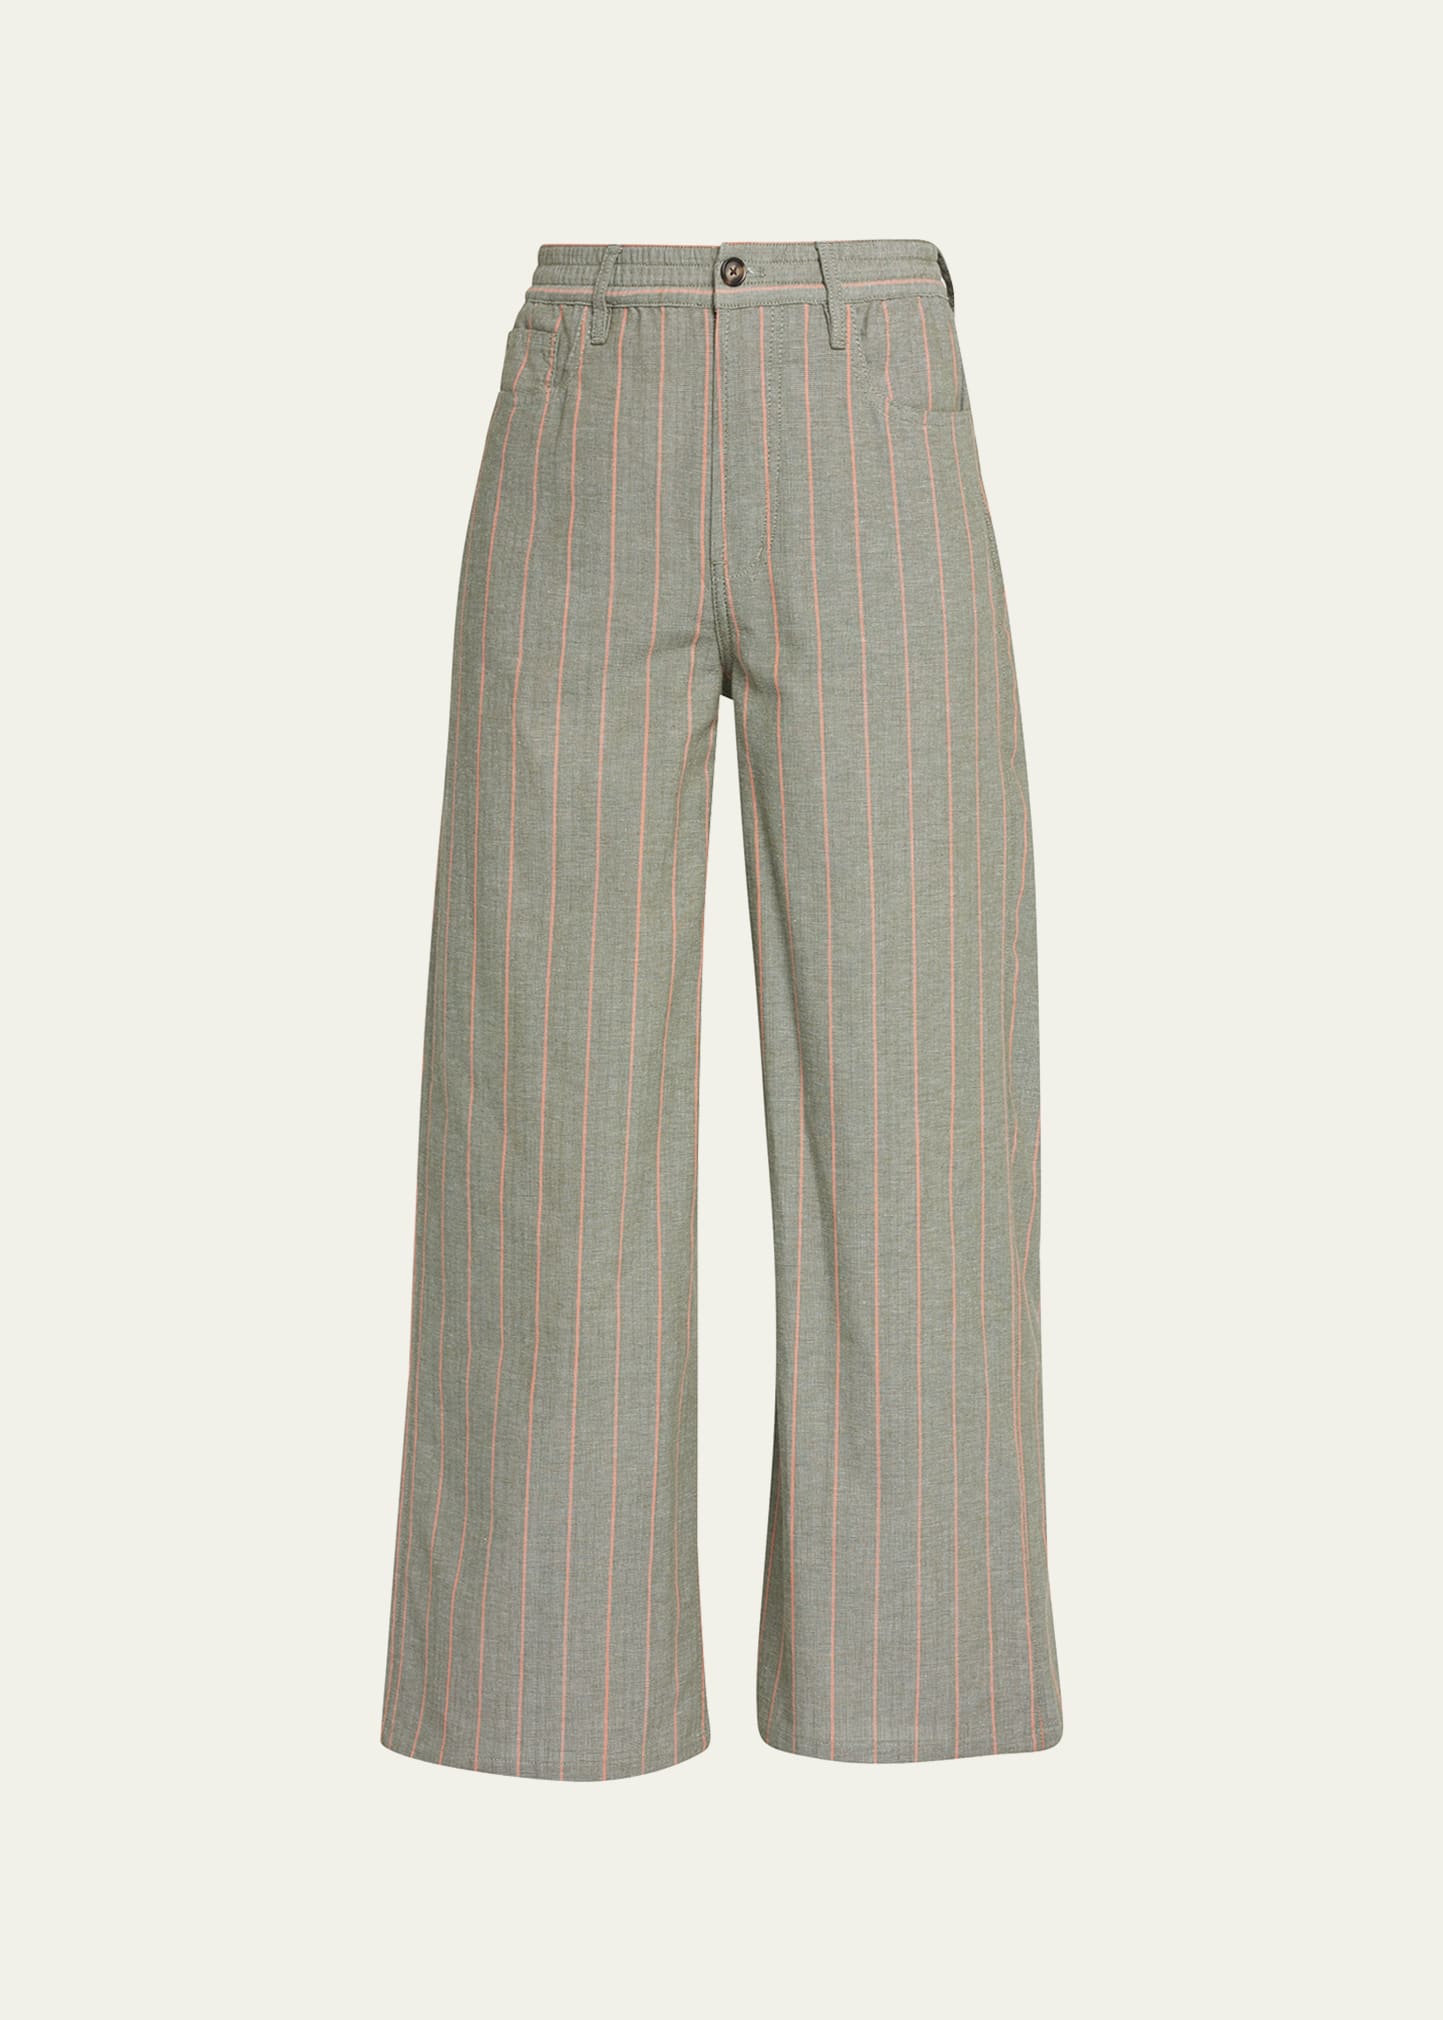 PALOMA PANT IN POTTERY